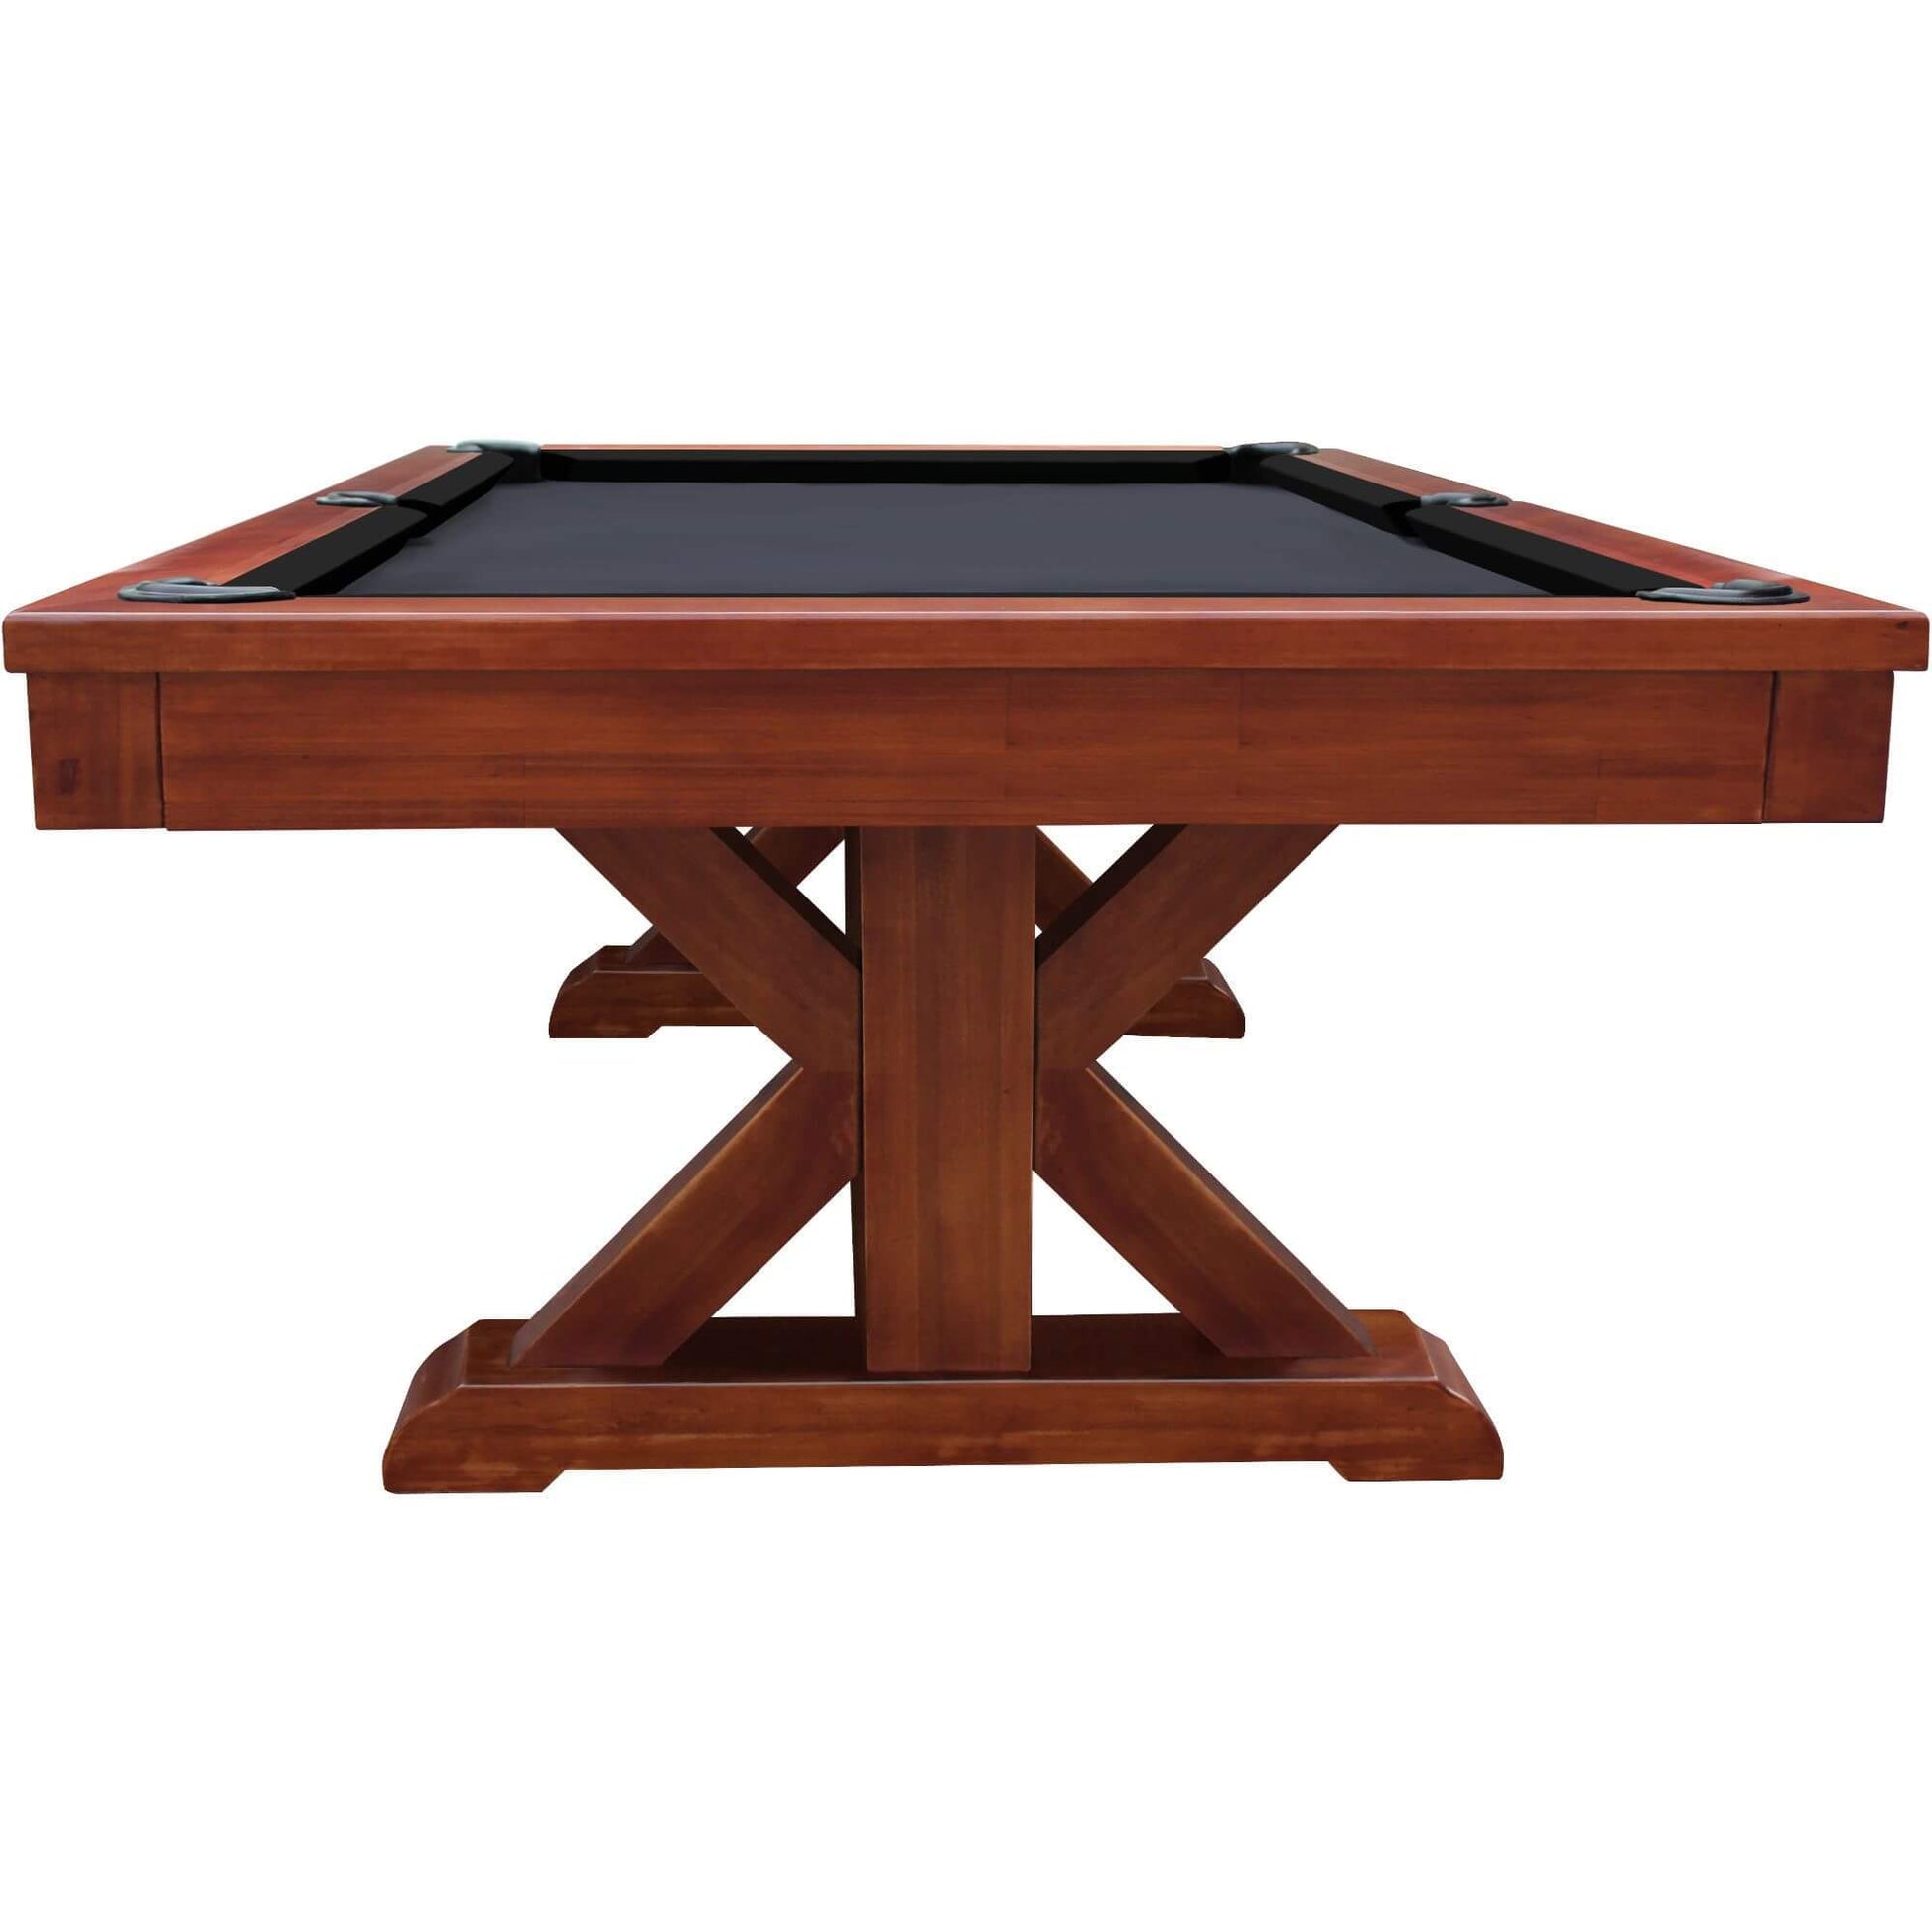 Playcraft Brazos River 8' Slate Pool Table with Optional Dining Top - Gaming Blaze